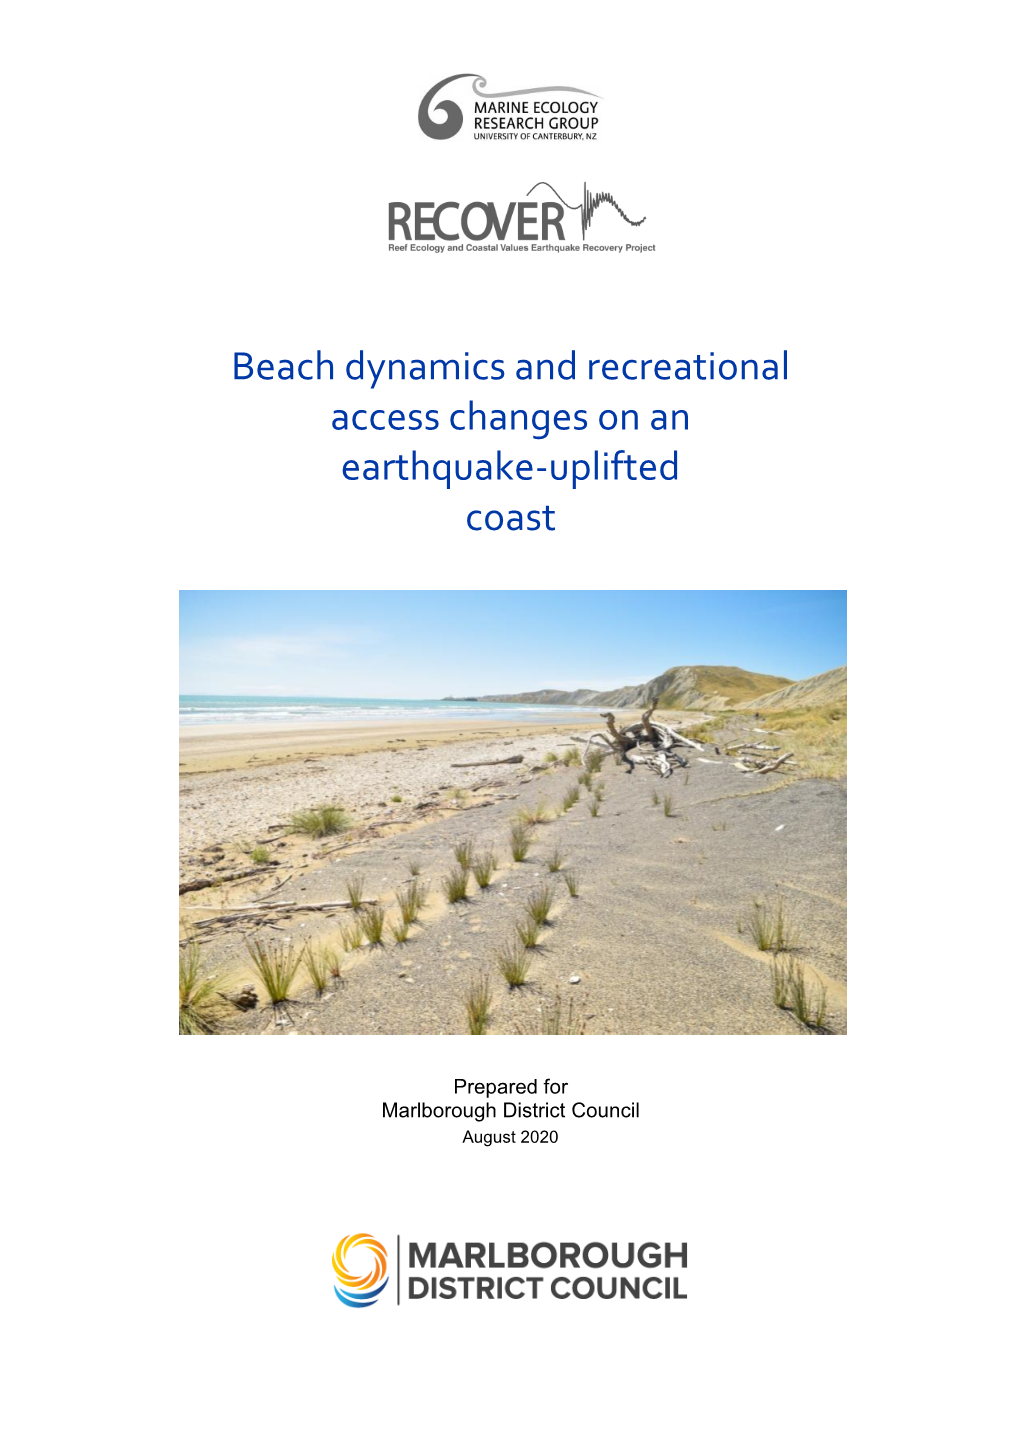 Beach Dynamics and Recreational Access Changes on an Earthquake-Uplifted Coast